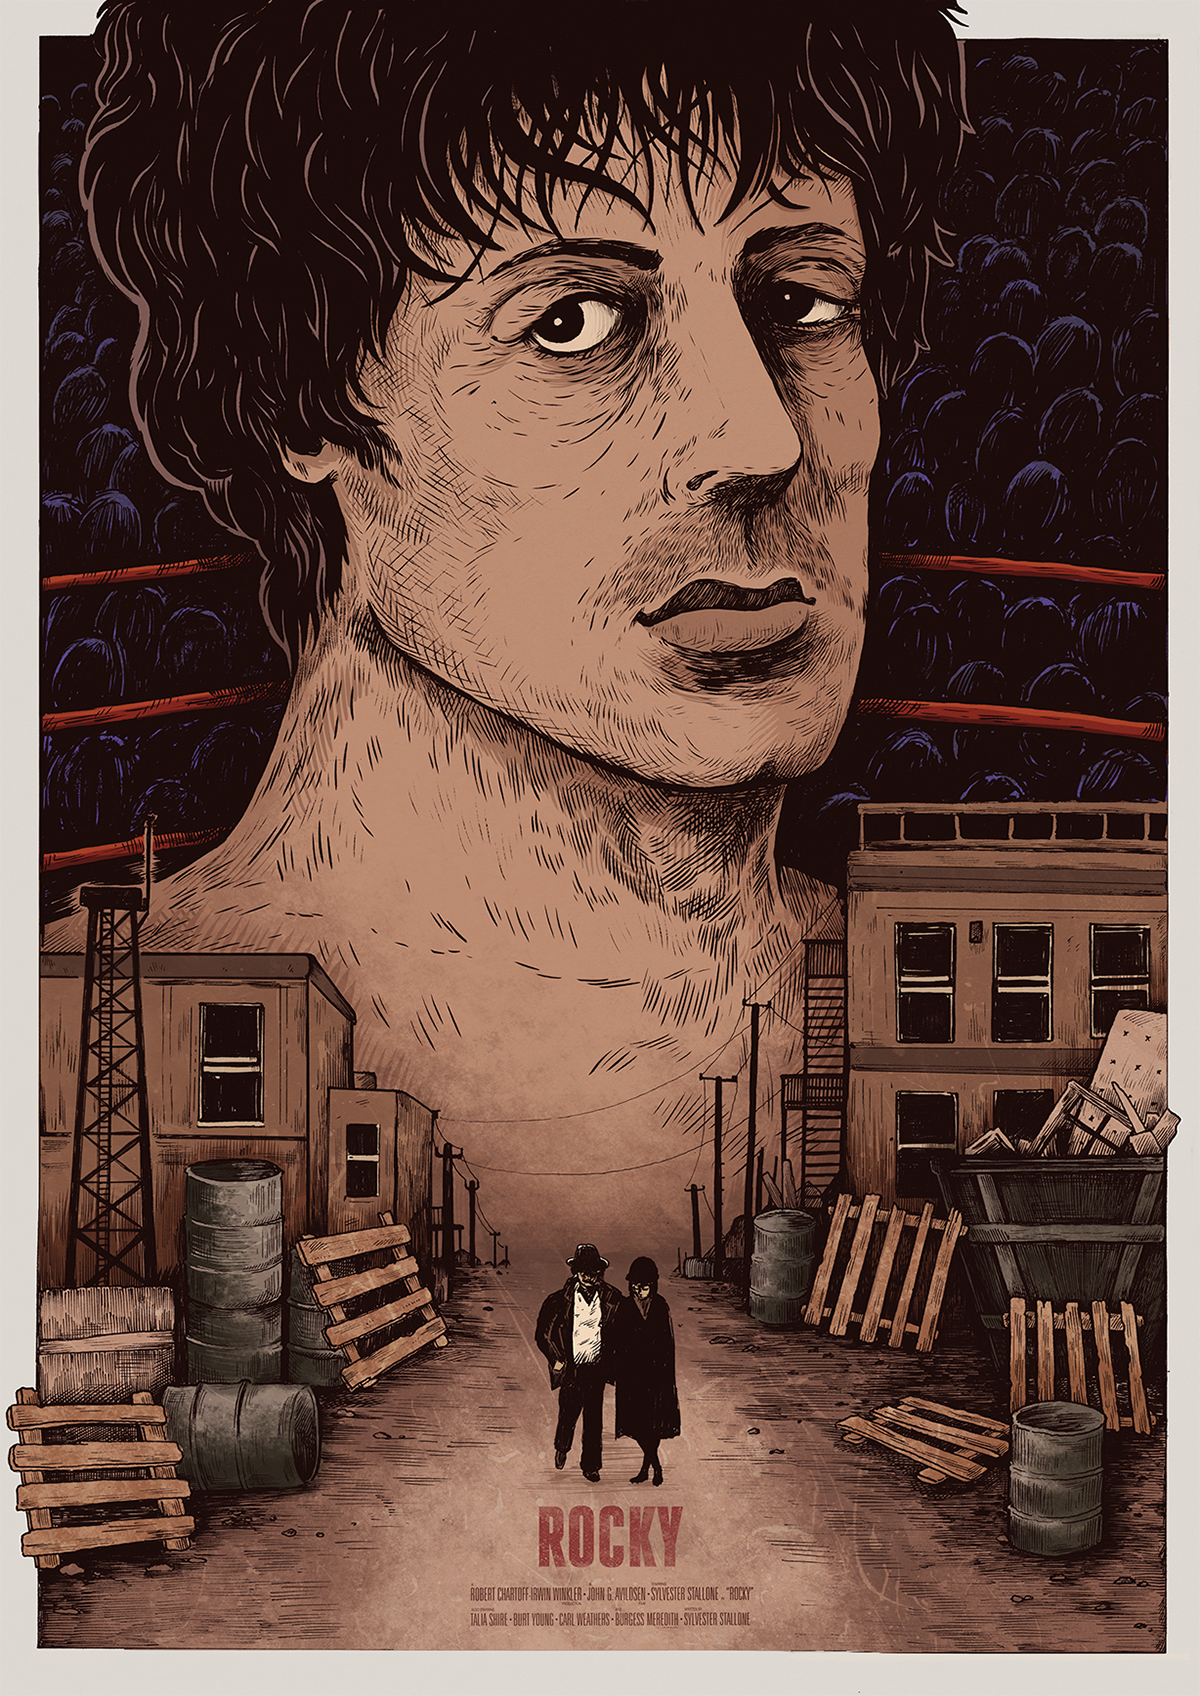 rocky balboa Rocky Boxing movie poster film poster Sylvester Stallone colour texture hand made hand drawn traditional